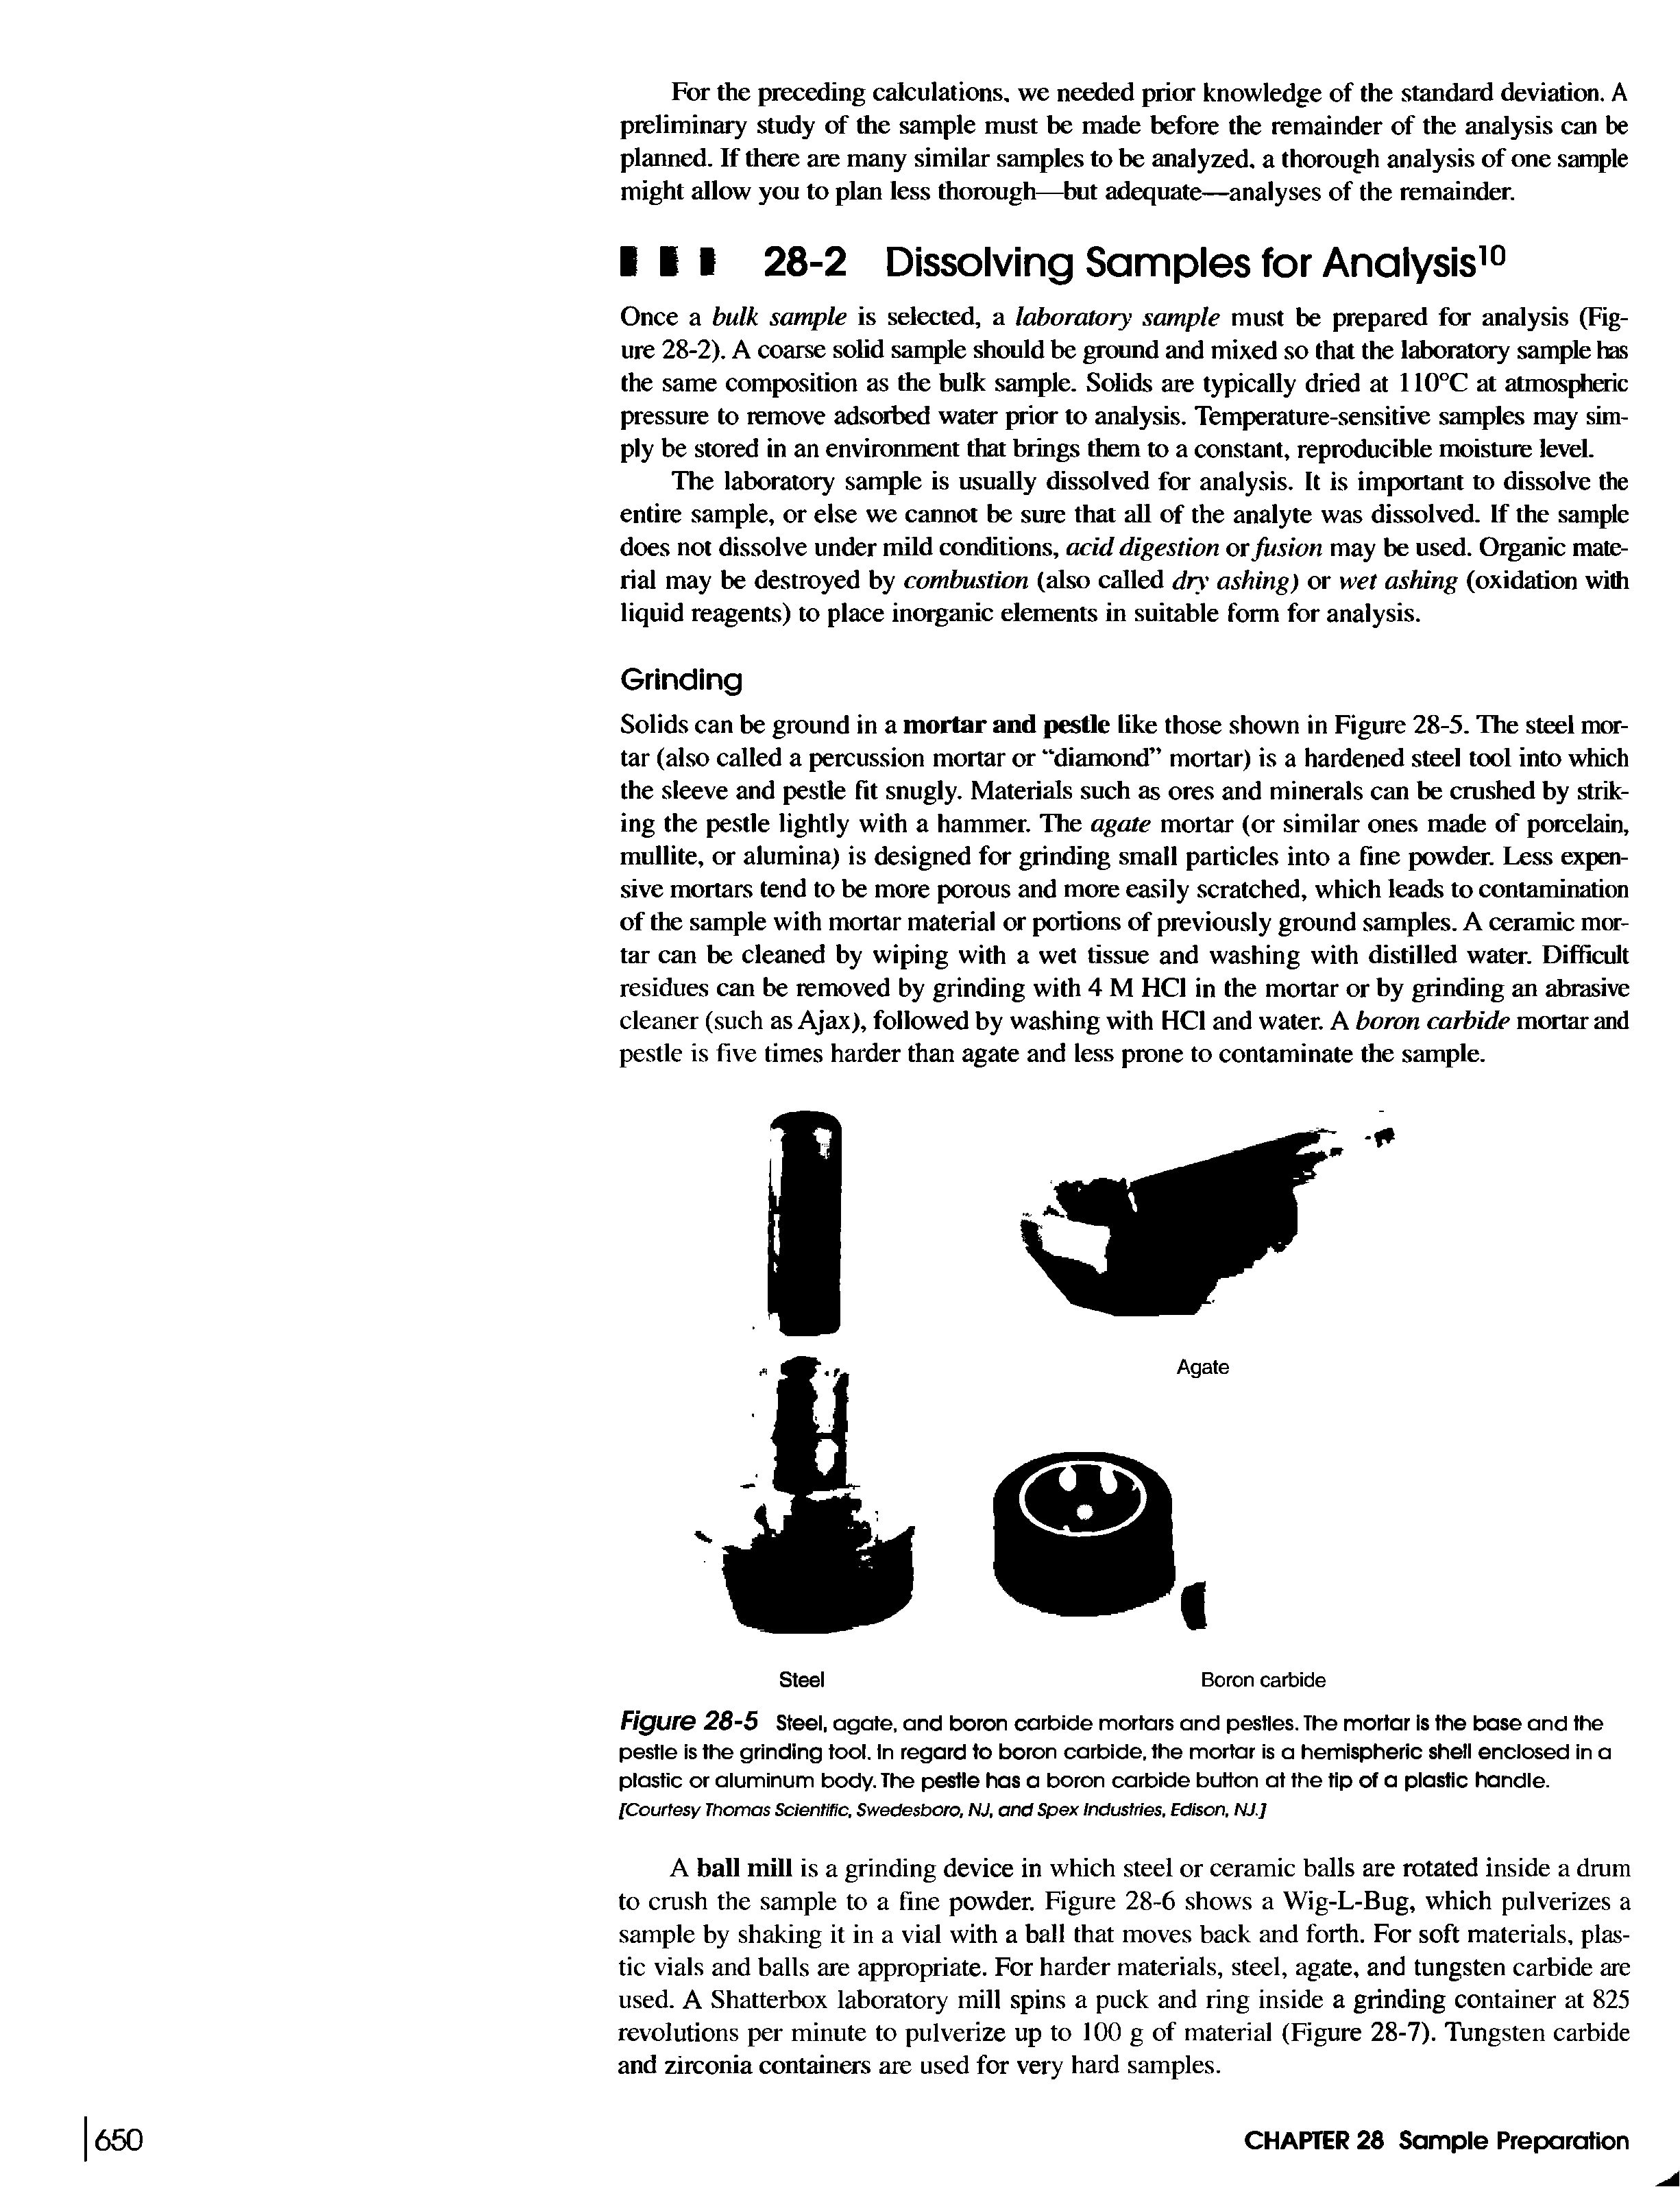 Figure 28-5 Steel, agate, and boron carbide mortars and pestles. The mortar Is the base and the pestle Is the grinding tool. In regard to boron carbide, the mortar is a hemispheric shell enclosed in a plastic or aluminum body. The pestle has a boron carbide button at the tip of a plastic handle. [Courtesy Thomas Scientific, Swedesboro, NJ, and Spex Industries, Edison, NJ]...